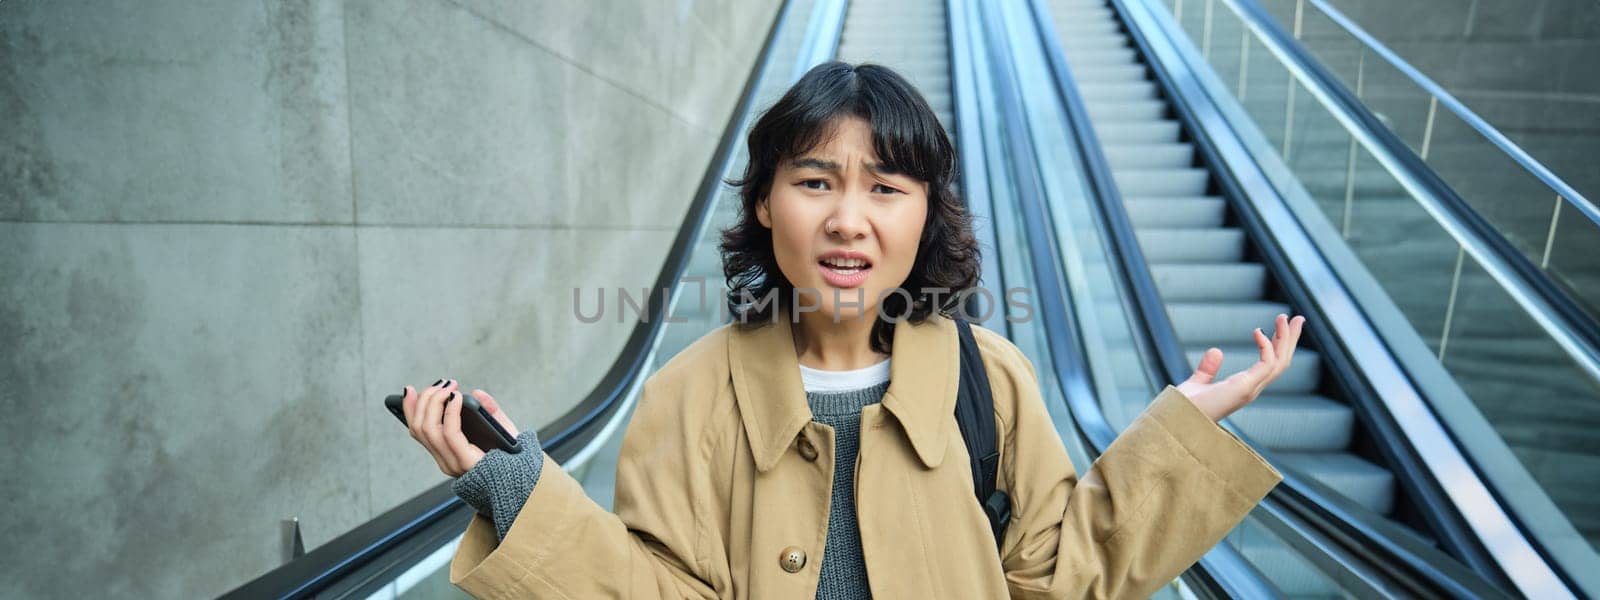 Portrait of confused asian girl doesn't know where she is, lost in unfamiliar city, goes down escalator with frustrated face, shrugging and looking at camera.